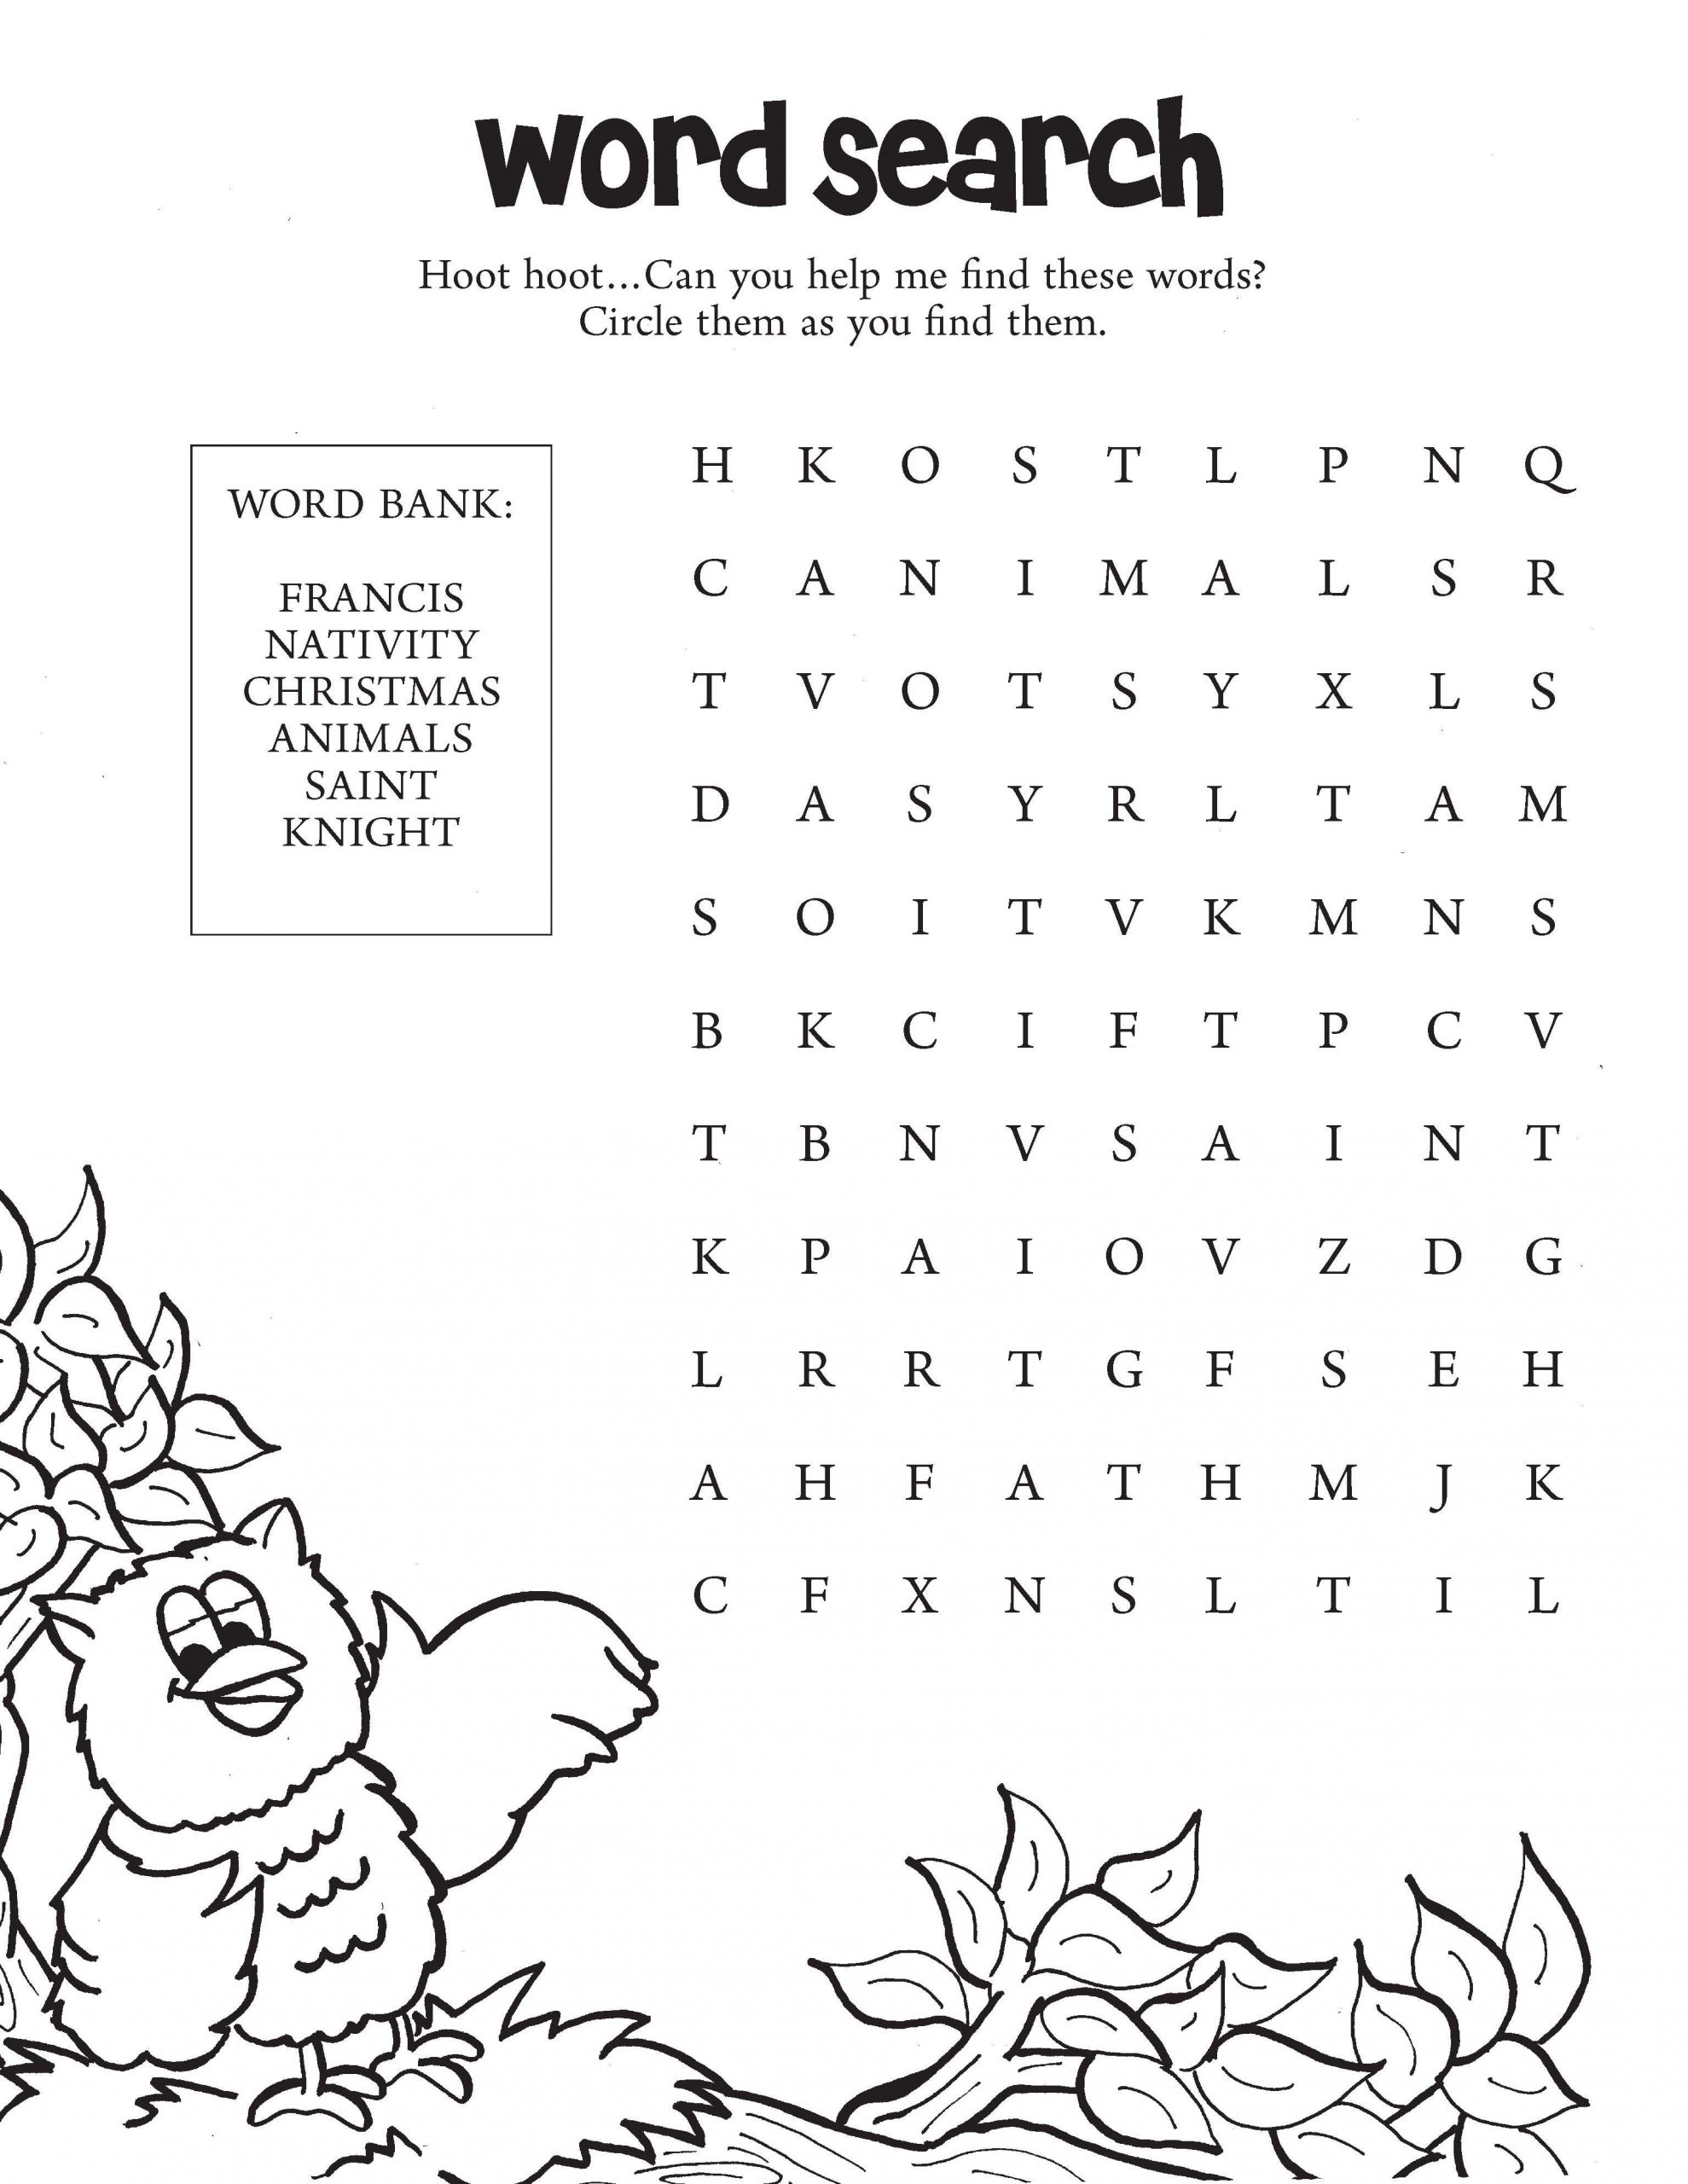 Download This Great Advent Word Search For Your Family Or